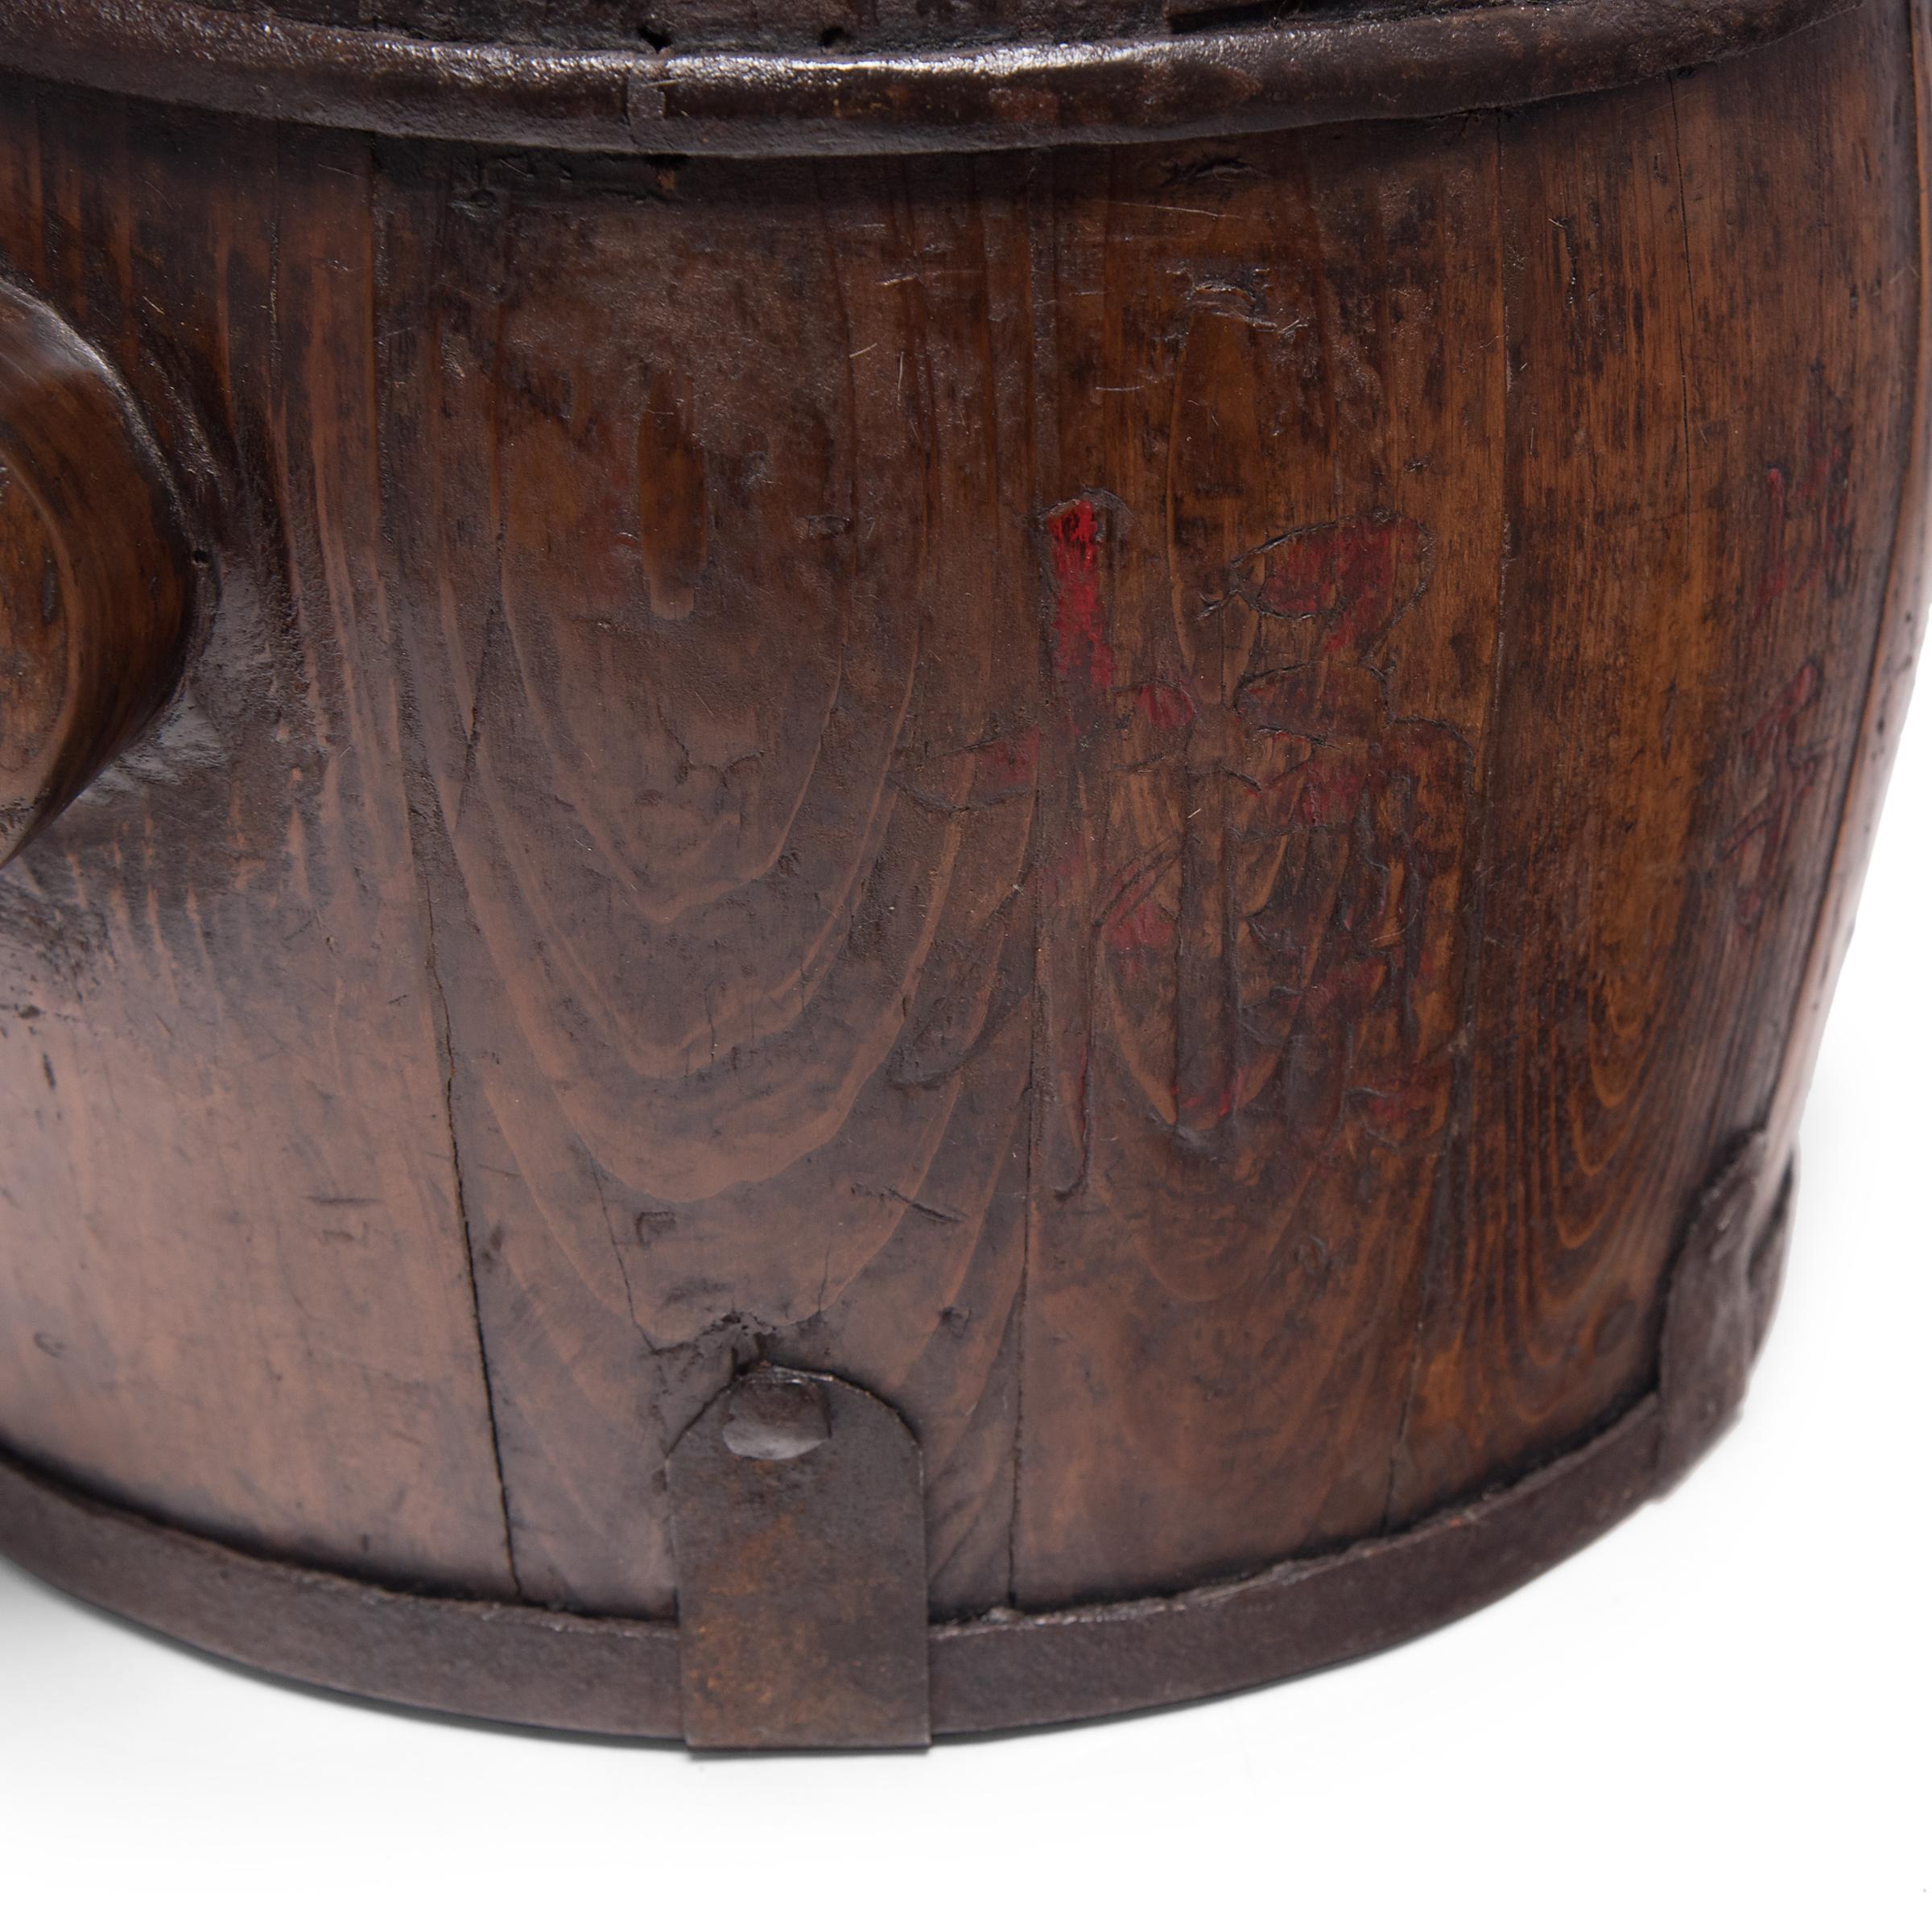 20th Century Chinese Barrel-Form Grain Container, c. 1900